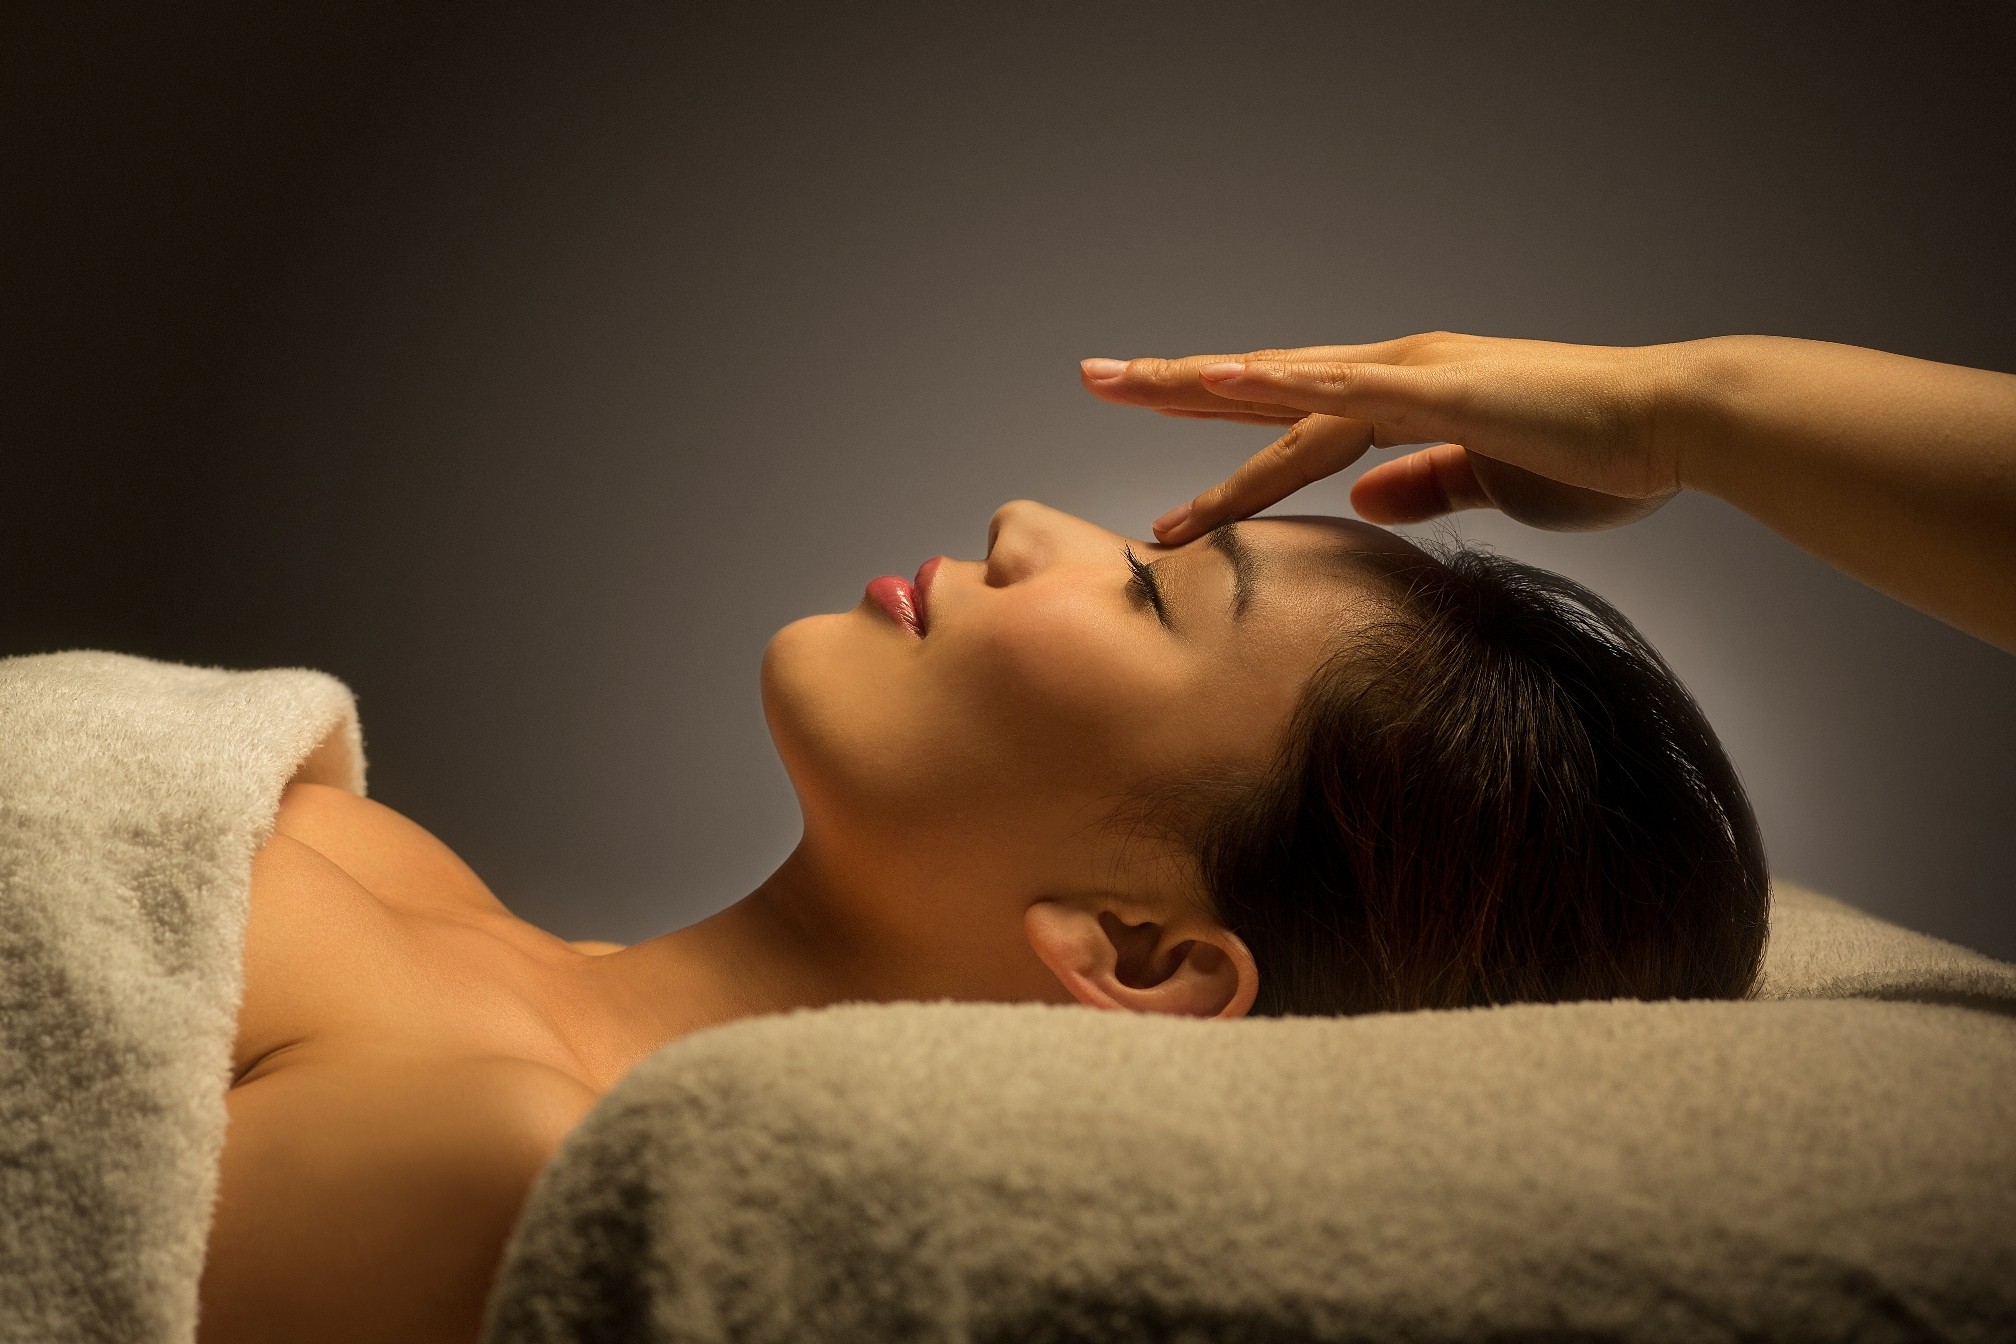 The Prodige des Océans Face and Body Ritual is a 150-minute treatment at Altira Spa that leaves you ready to tackle the stress of living in Hong Kong again.